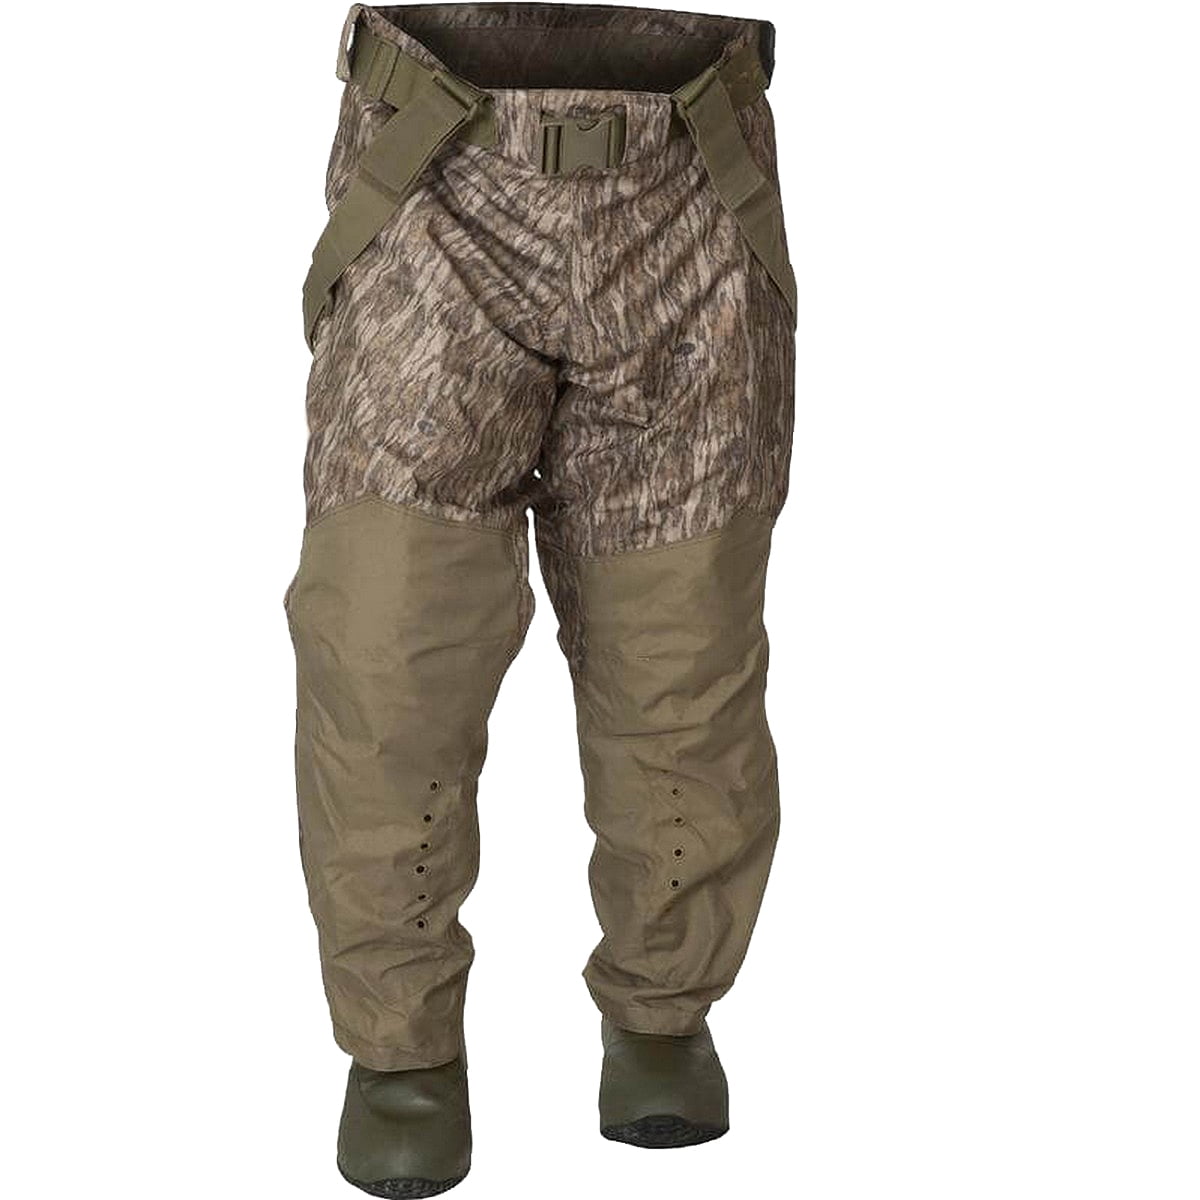 NEW BANDED GEAR REDZONE BREATHABLE INSULATED WAIST WADERS MAX-5 CAMO SIZE 12 